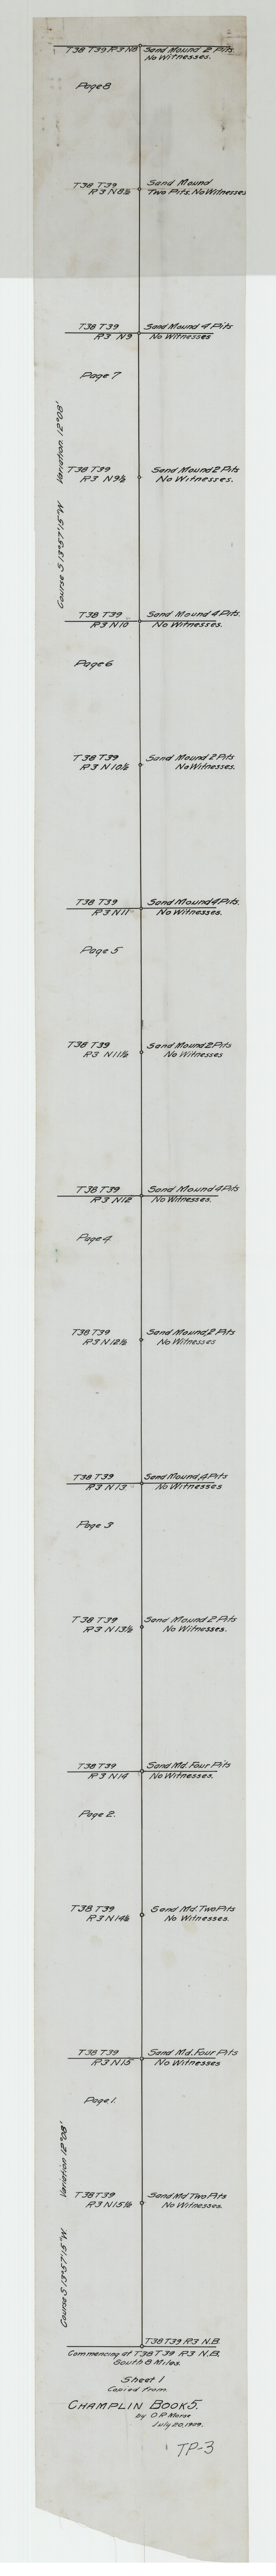 93177, Sheet 1 copied from Champlin Book 5 [Strip Map showing T. & P. connecting lines], Twichell Survey Records